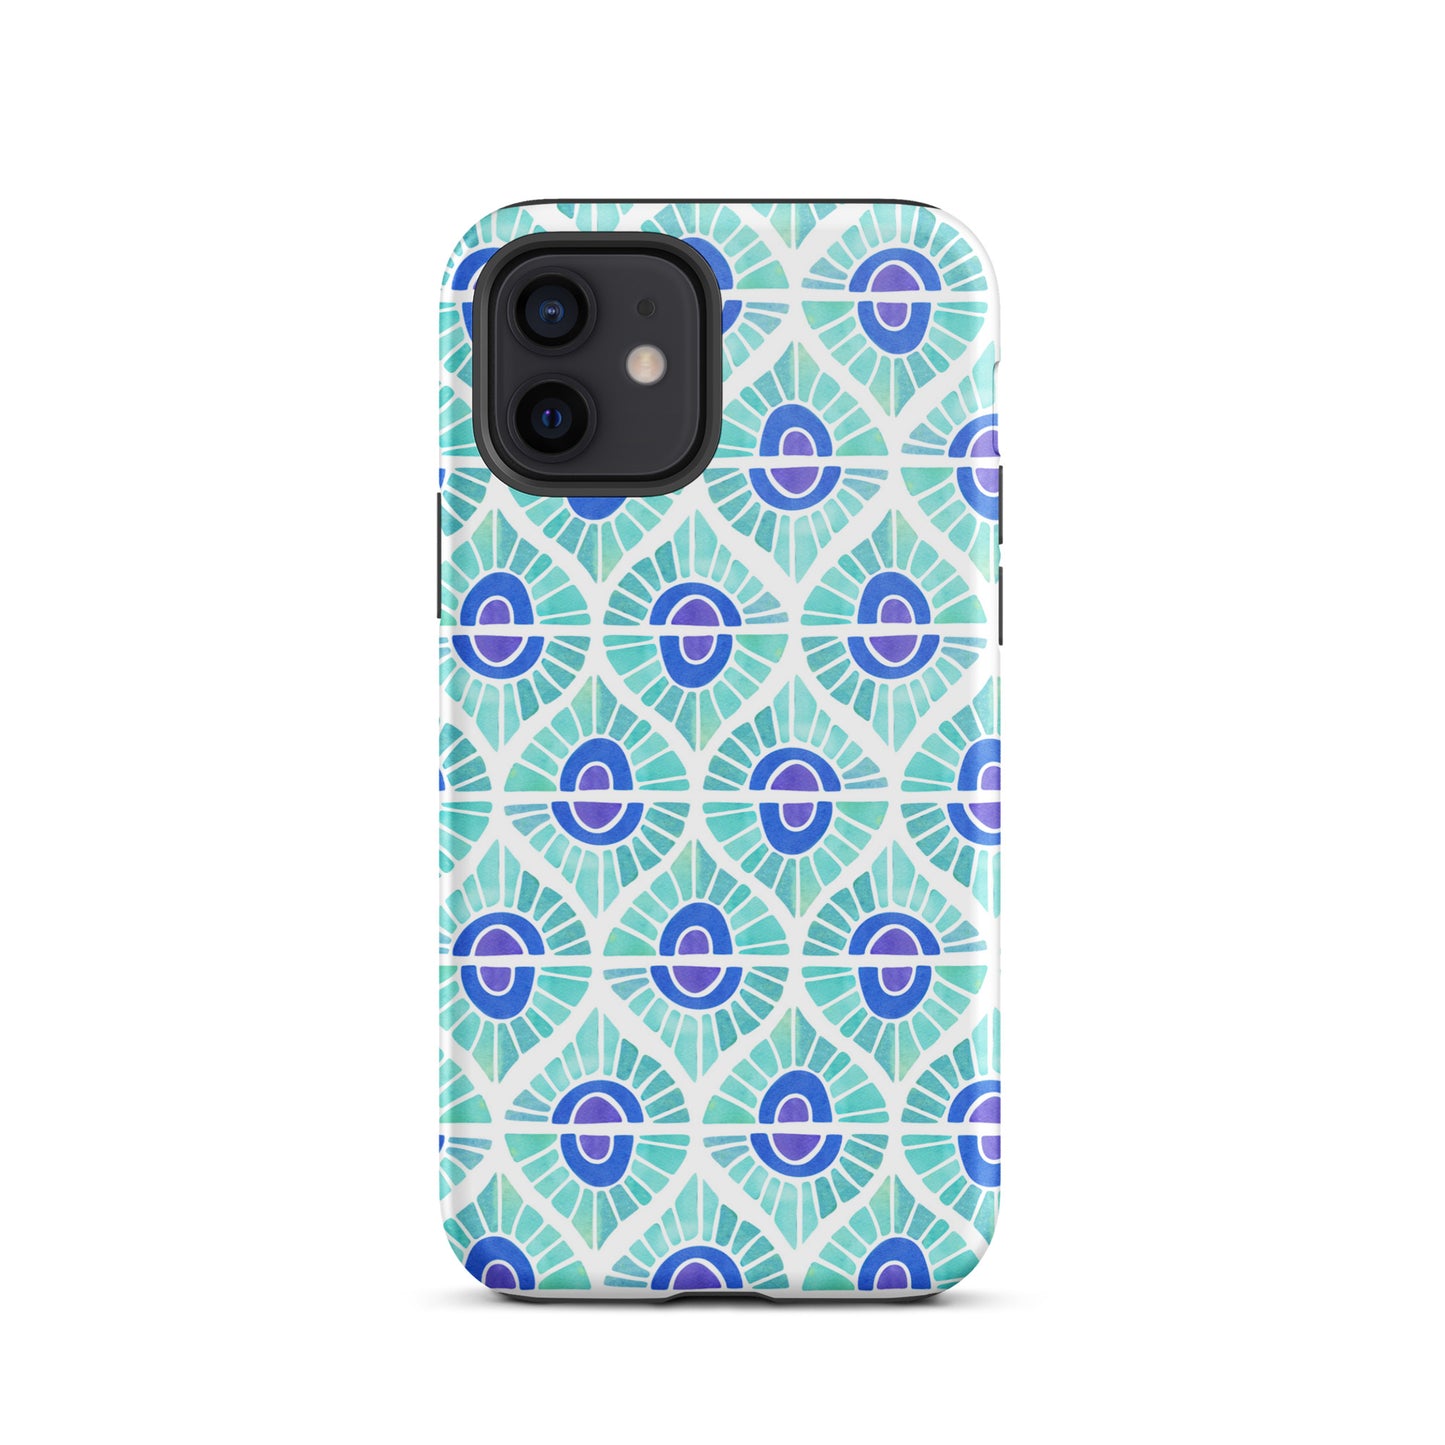 Turquoise Bay- Tough iPhone Case